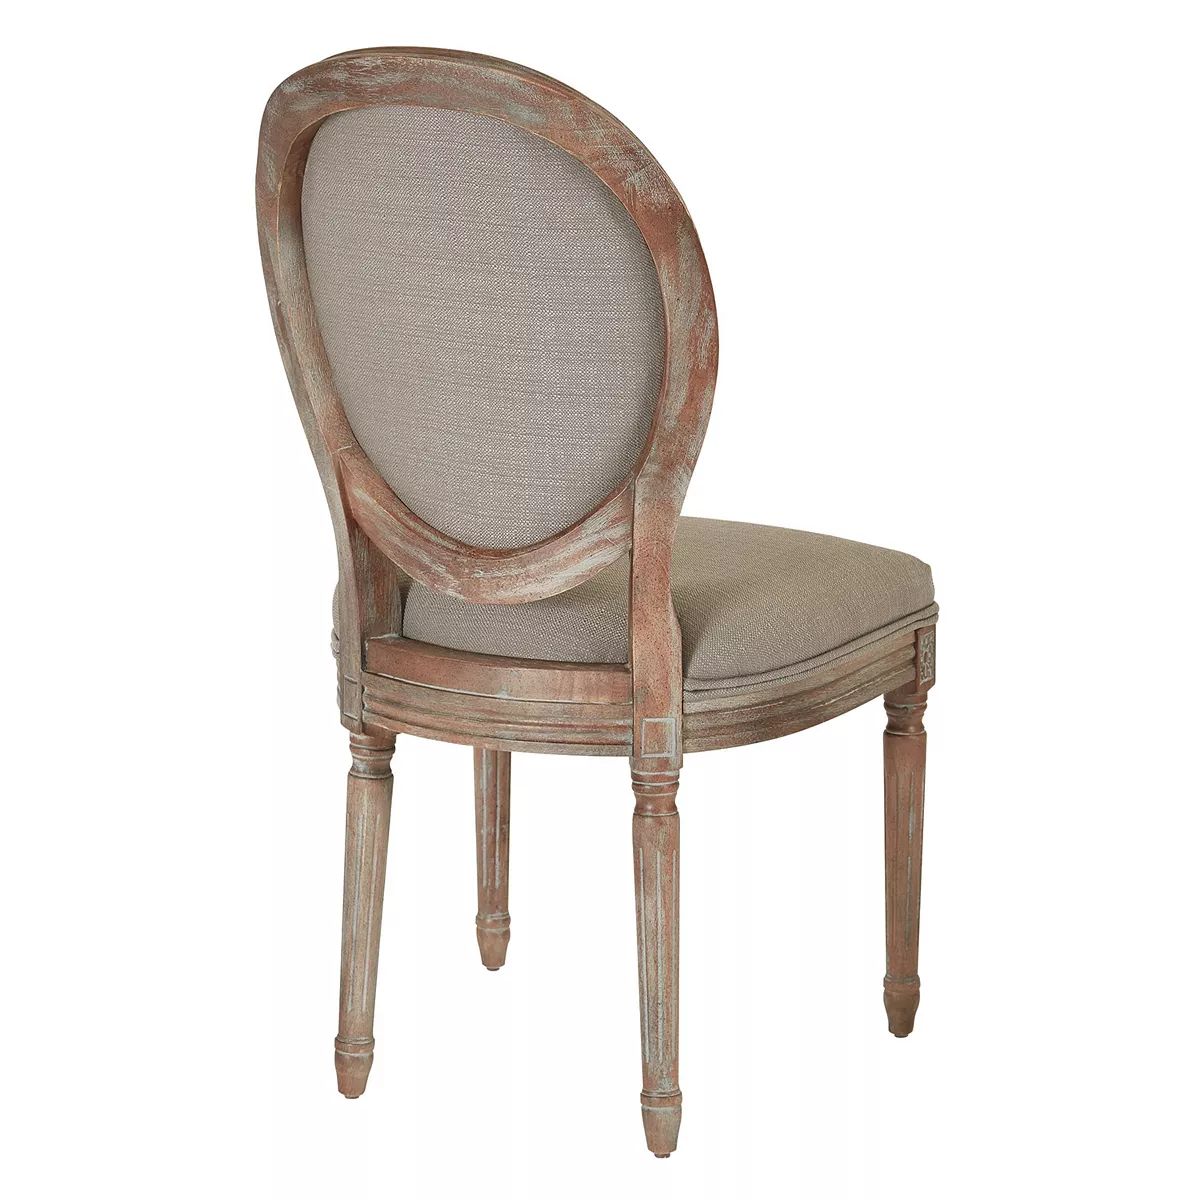 OSP Home Furnishings Lillian Oval Back Dining Chair | Kohl's